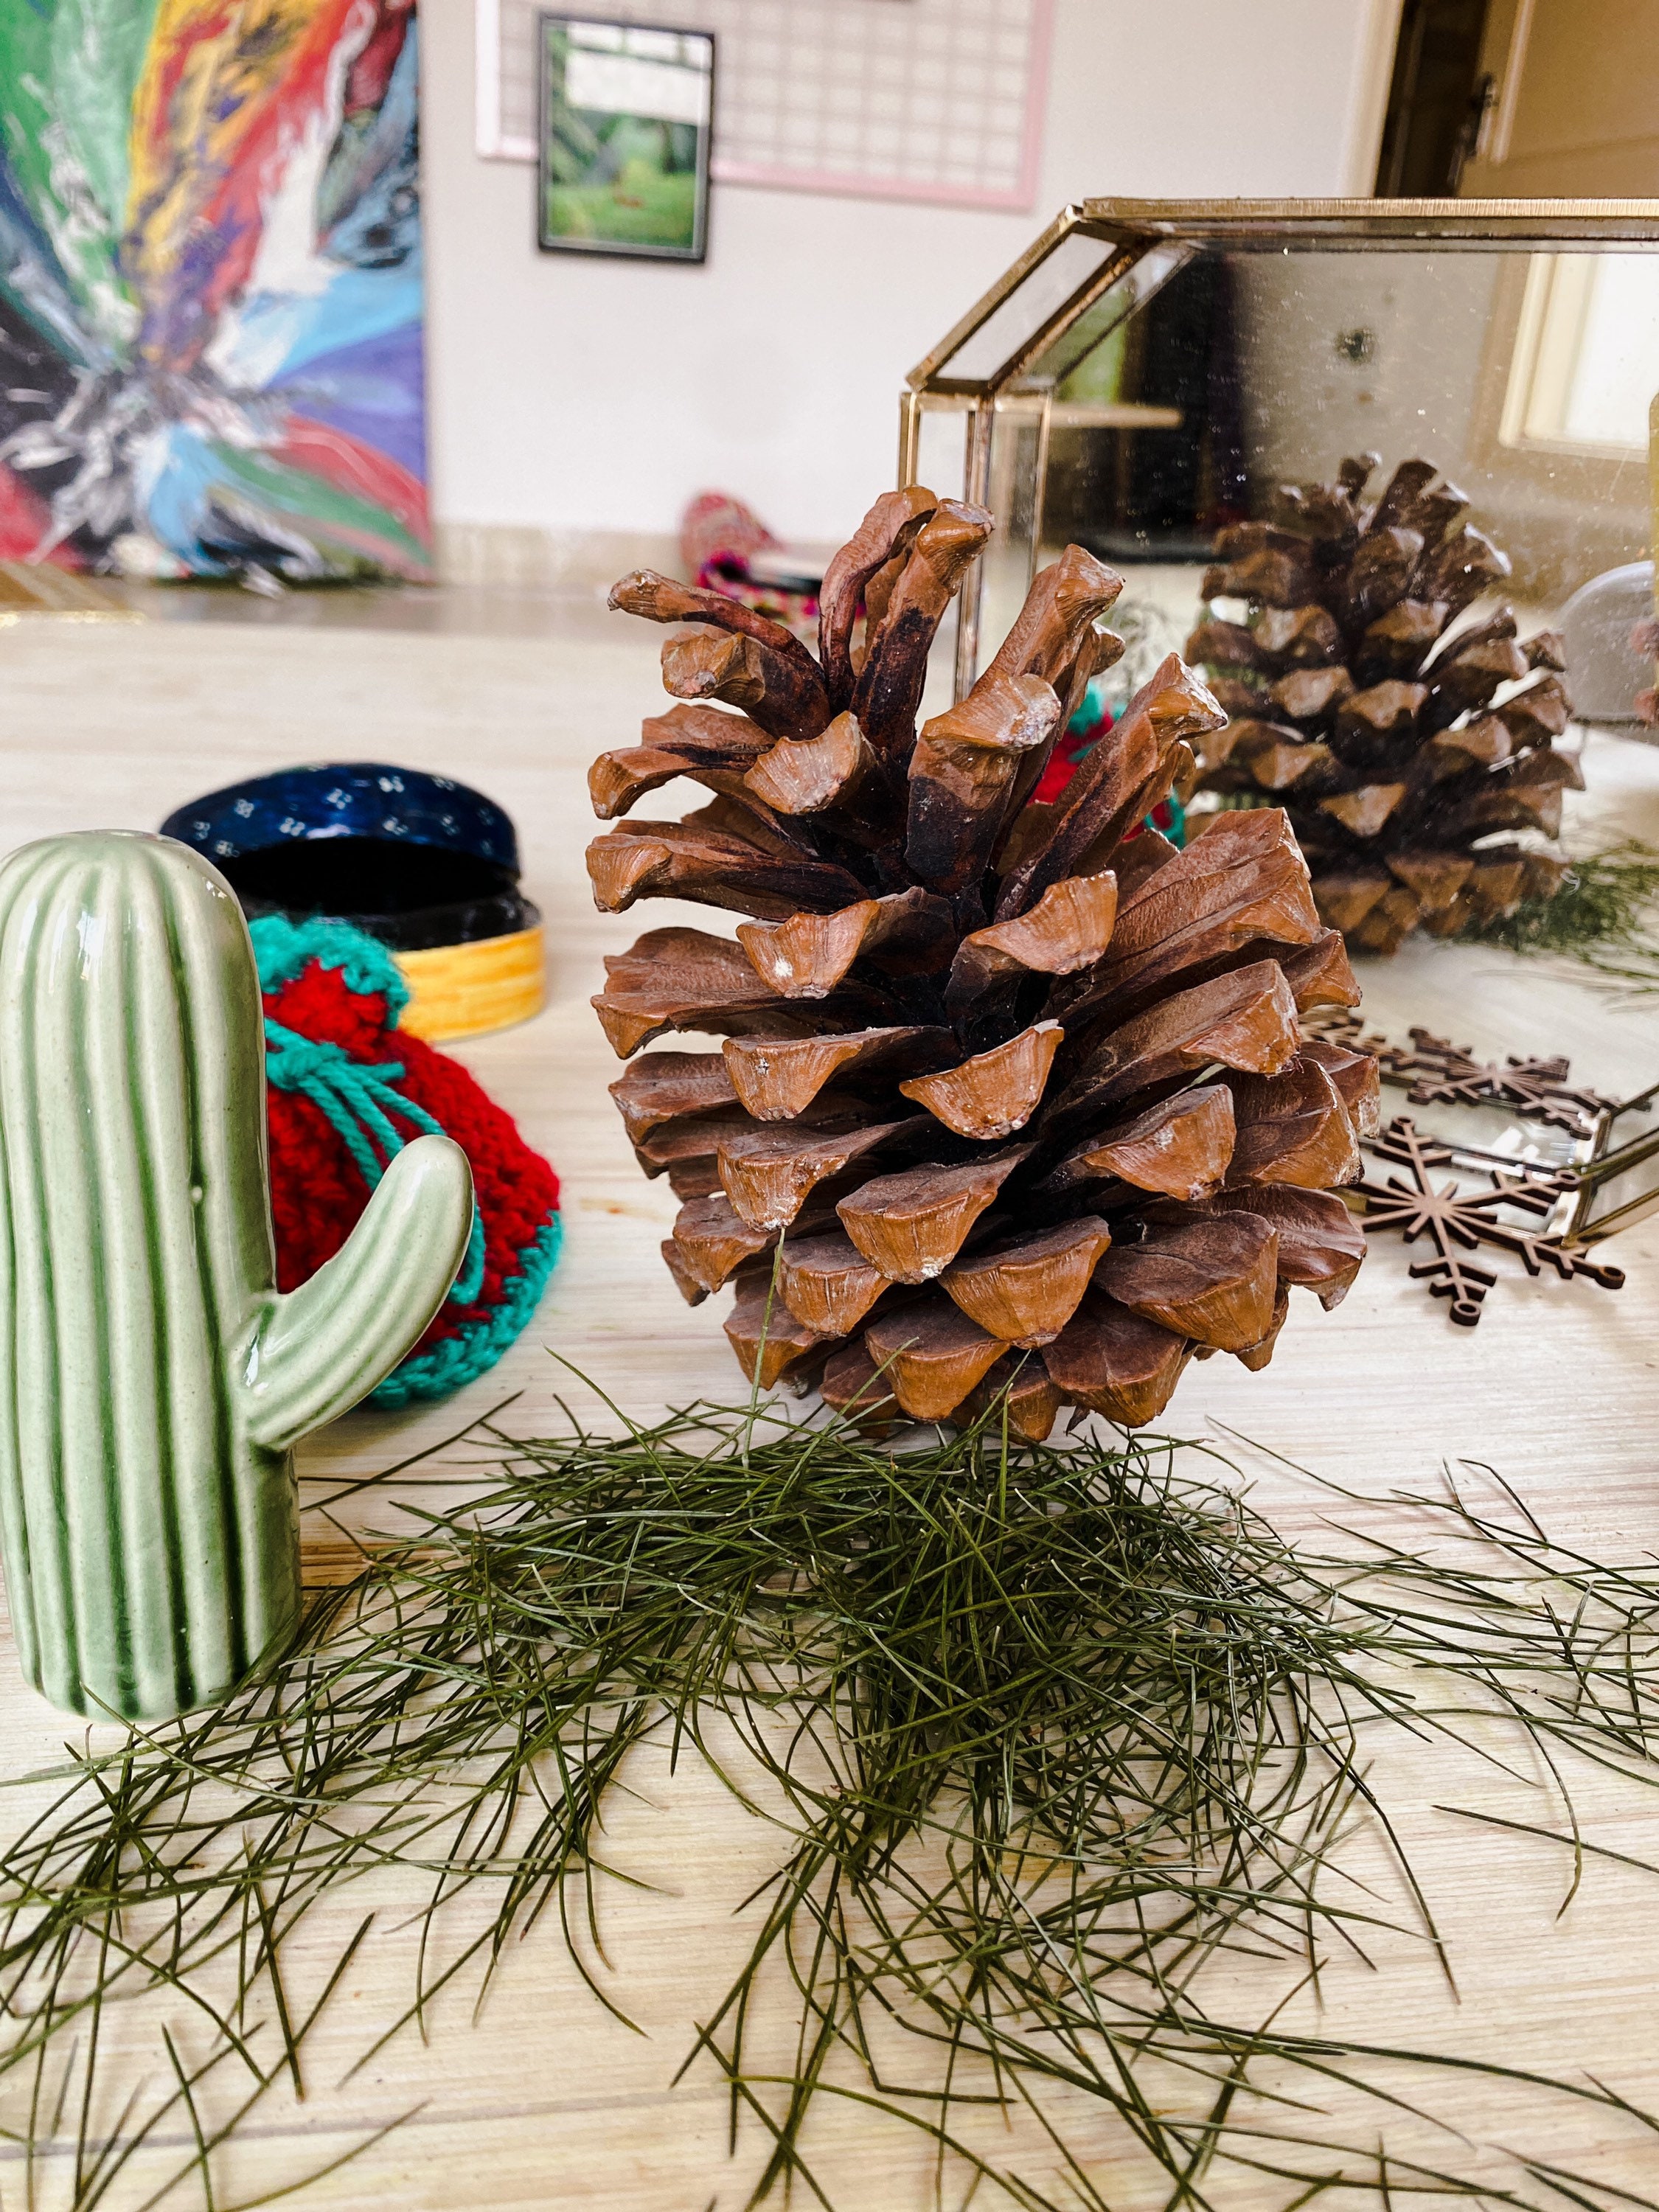  40 Pcs Christmas Pine Cones, Natural Small PineCones for  Decorating, Pine Cone Ornaments with Hanging Strings for Crafts Wreath  Garlands DIY Gift Tag Christmas Tree Wedding Decor : Home & Kitchen